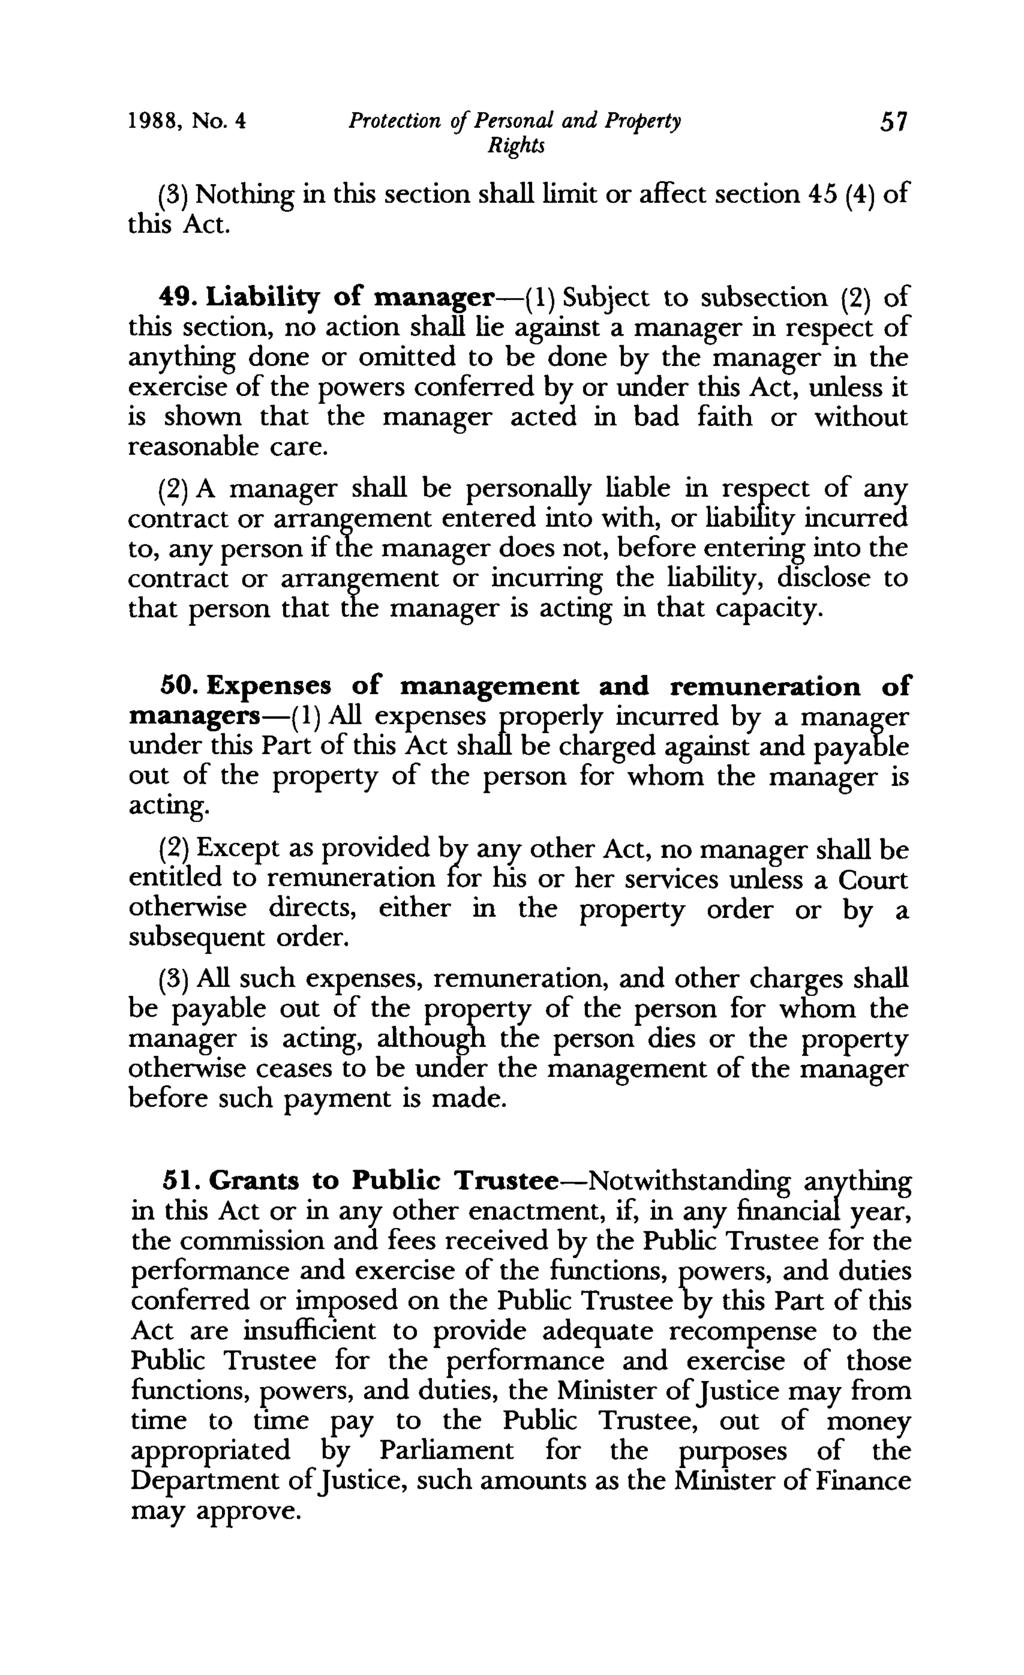 1988, No. 4 Protection of Personal and Property 57 (3) Nothing in this section shall limit or affect section 45 (4) of this Act. 49.